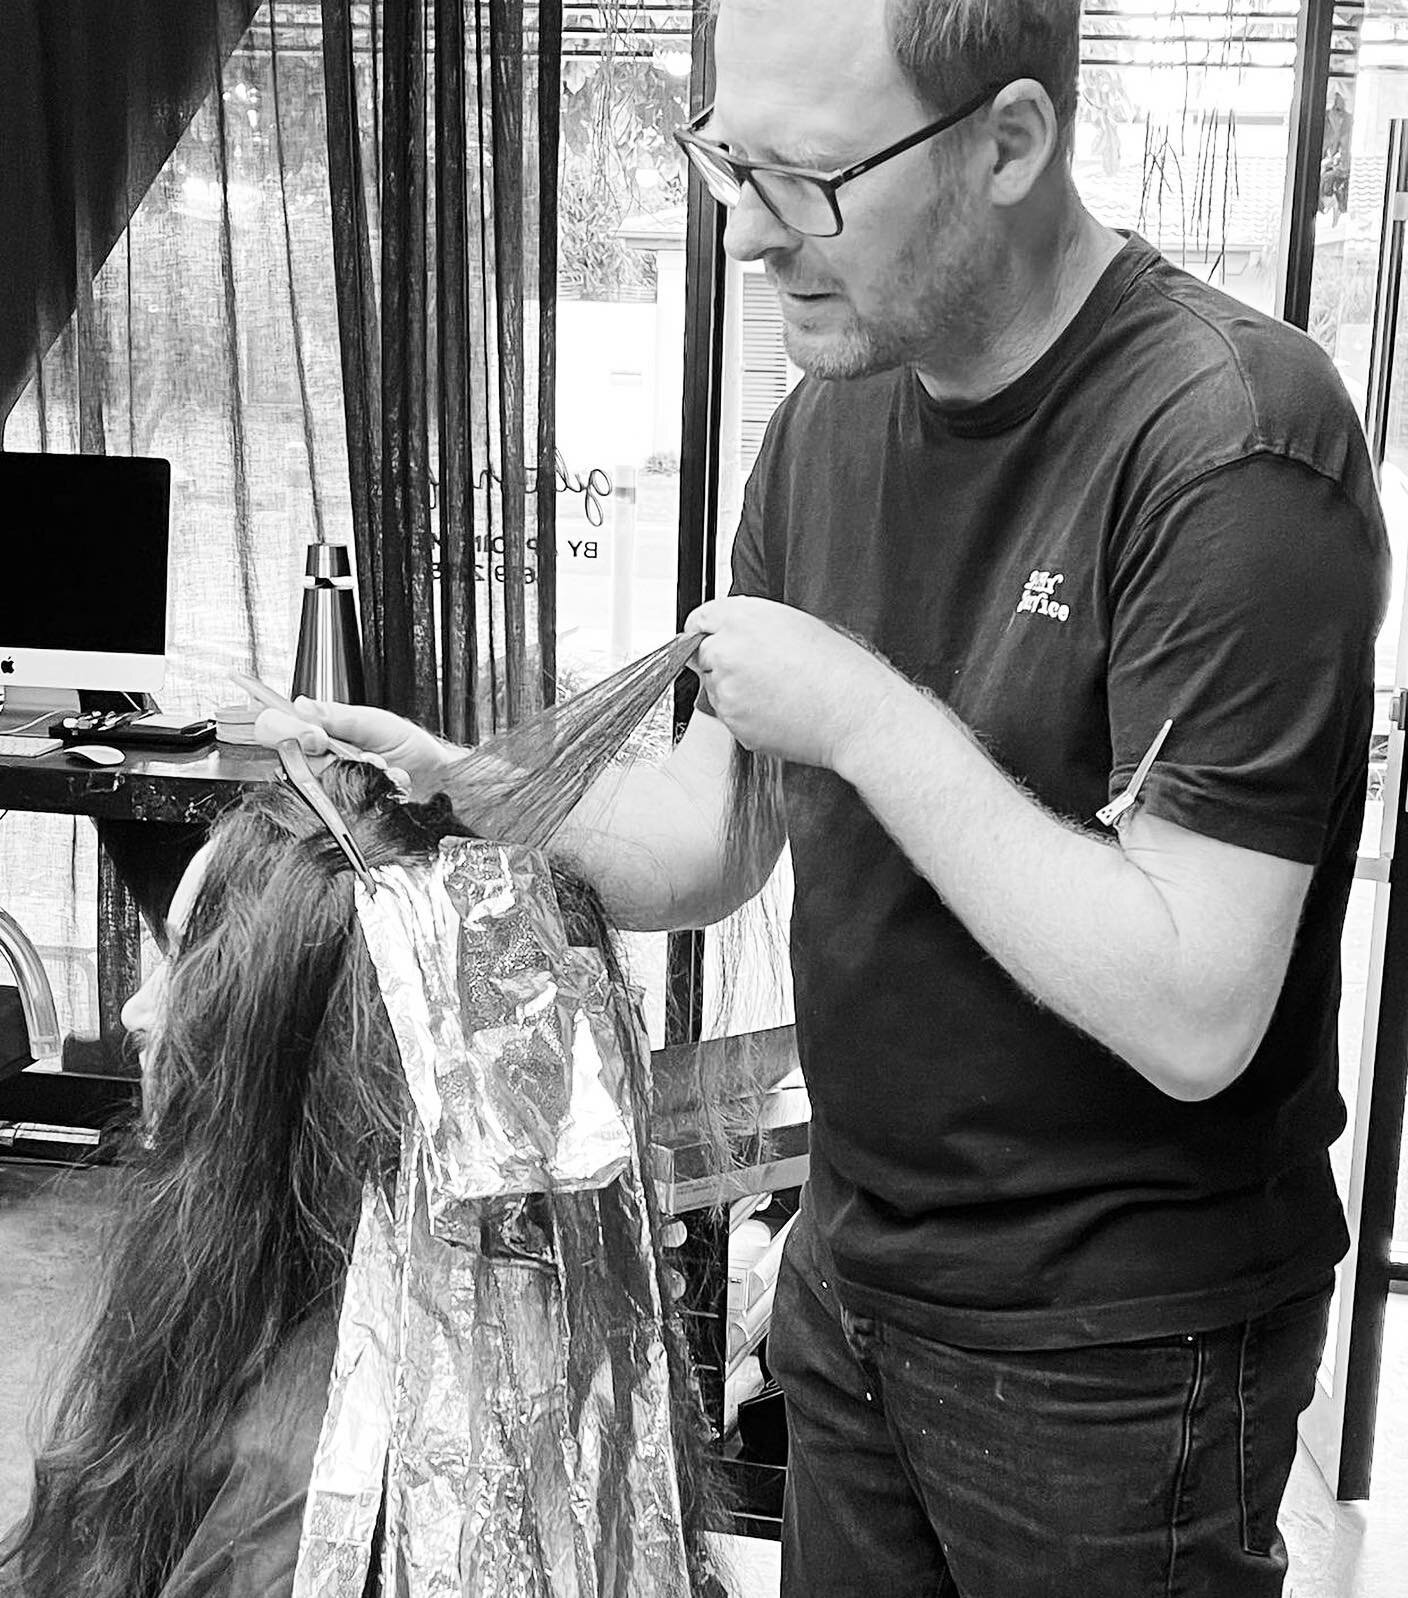 Lincoln doing his thing 🖤 #gilstonfourfamily #goldcoasthairsalon